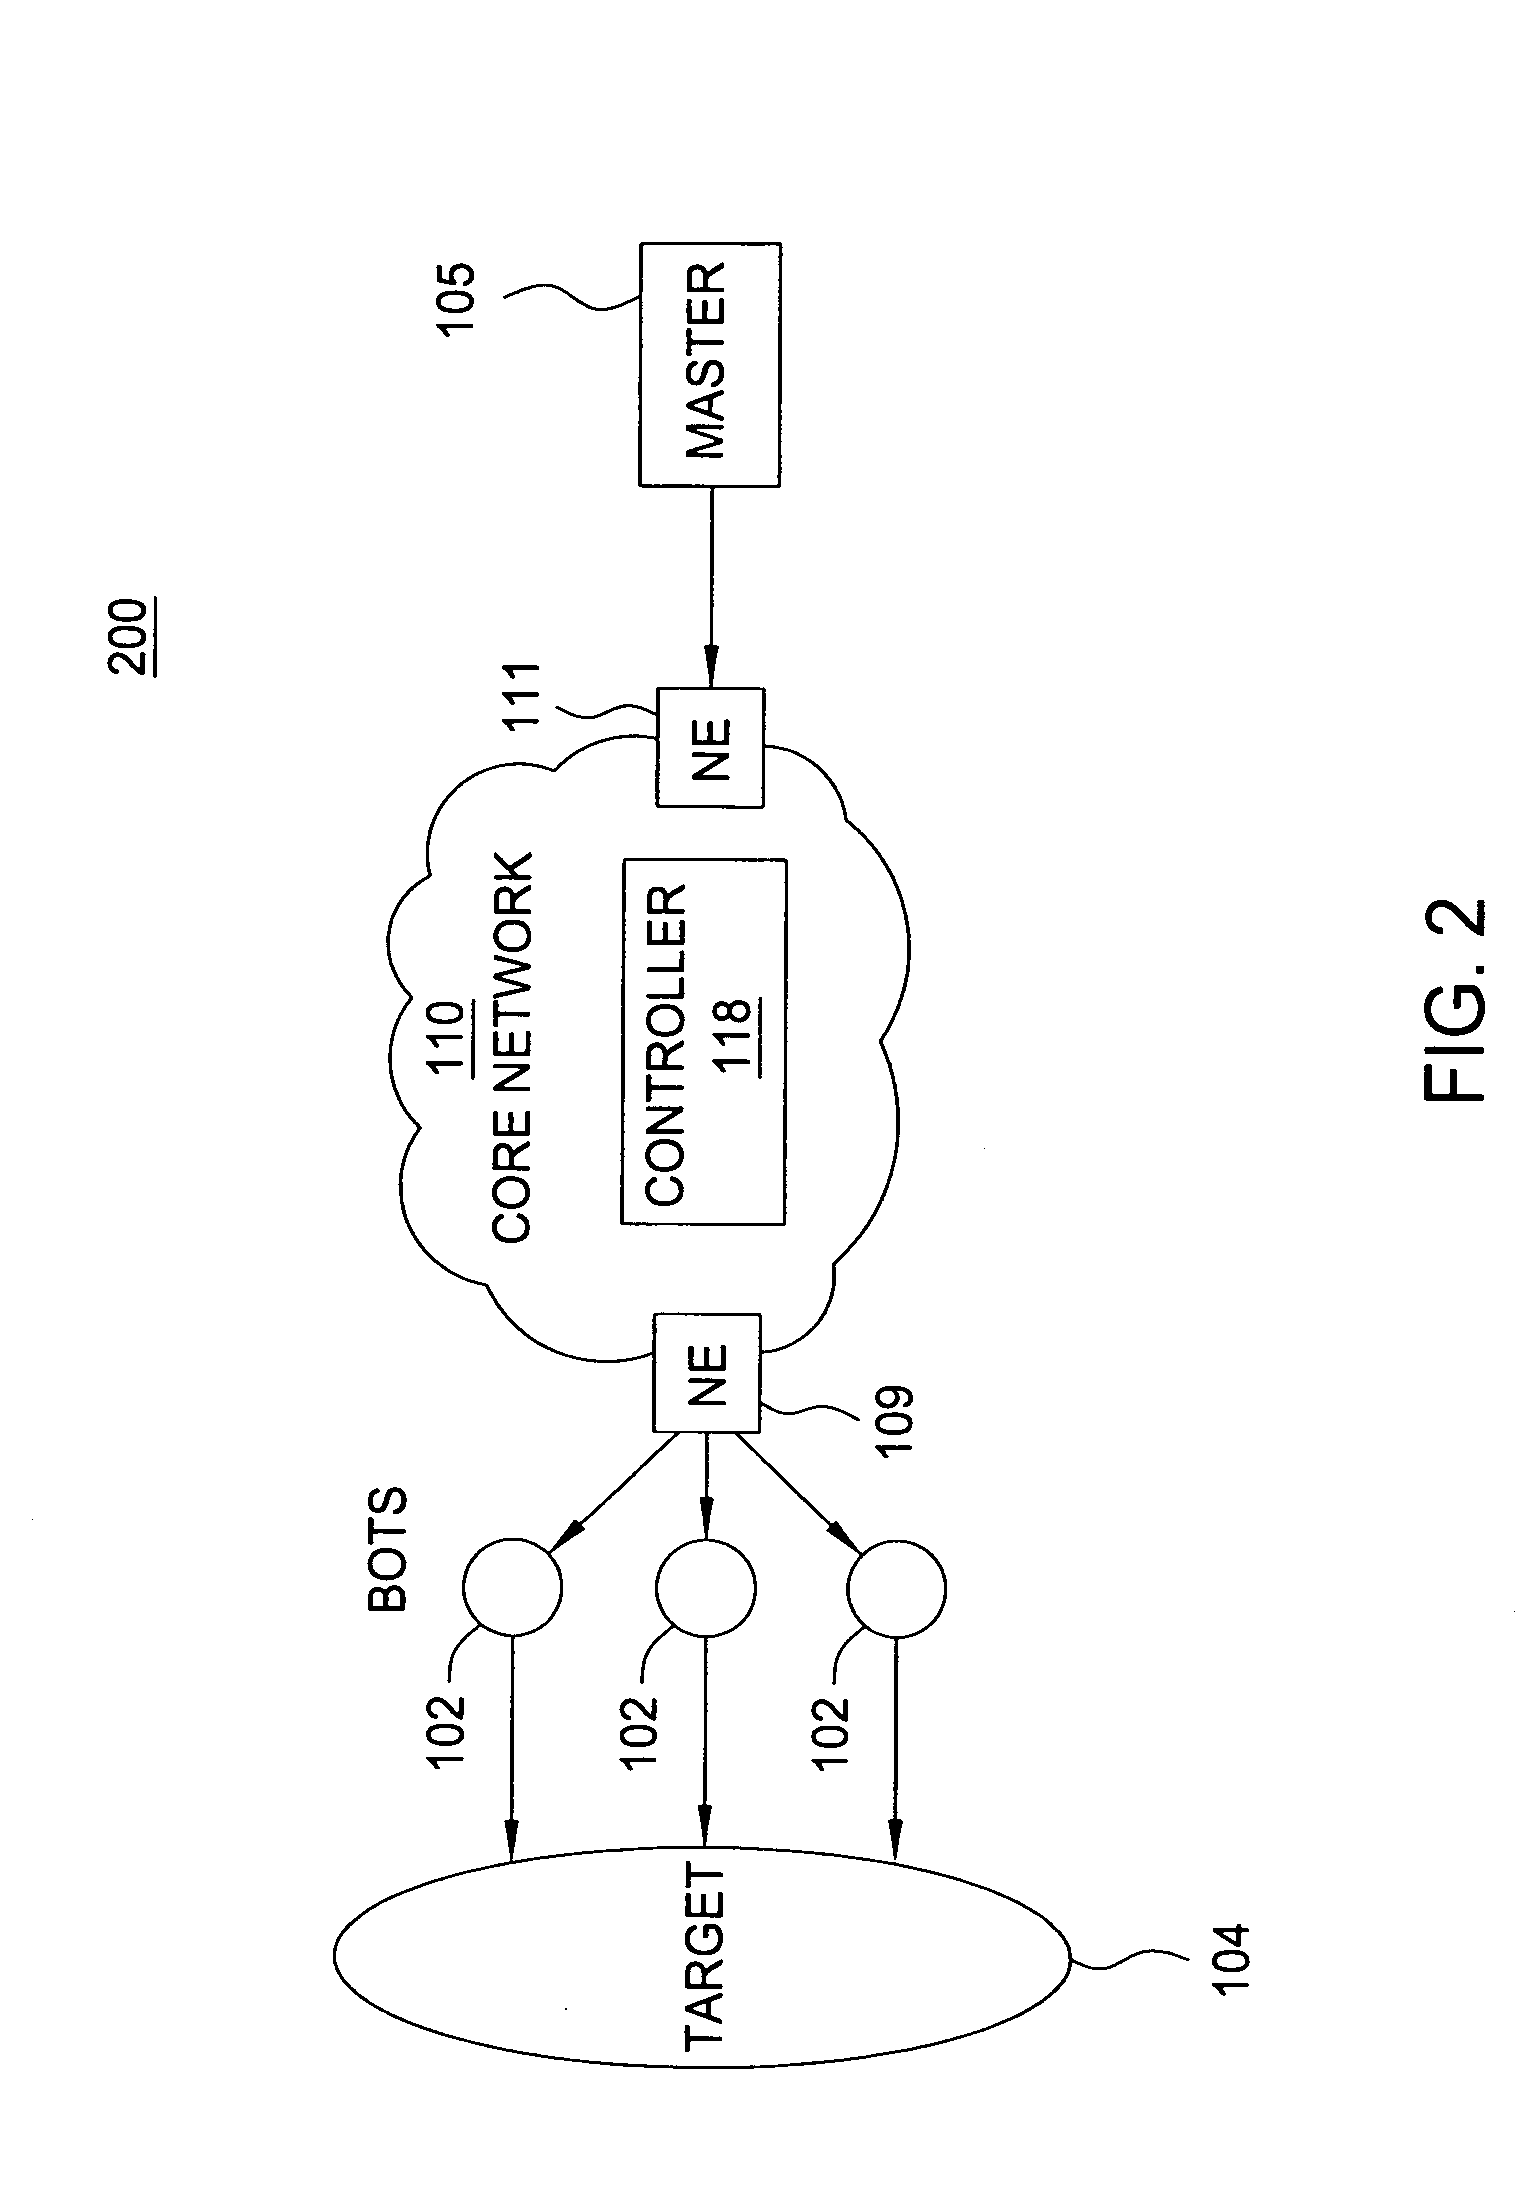 Method and apparatus for detecting compromised host computers